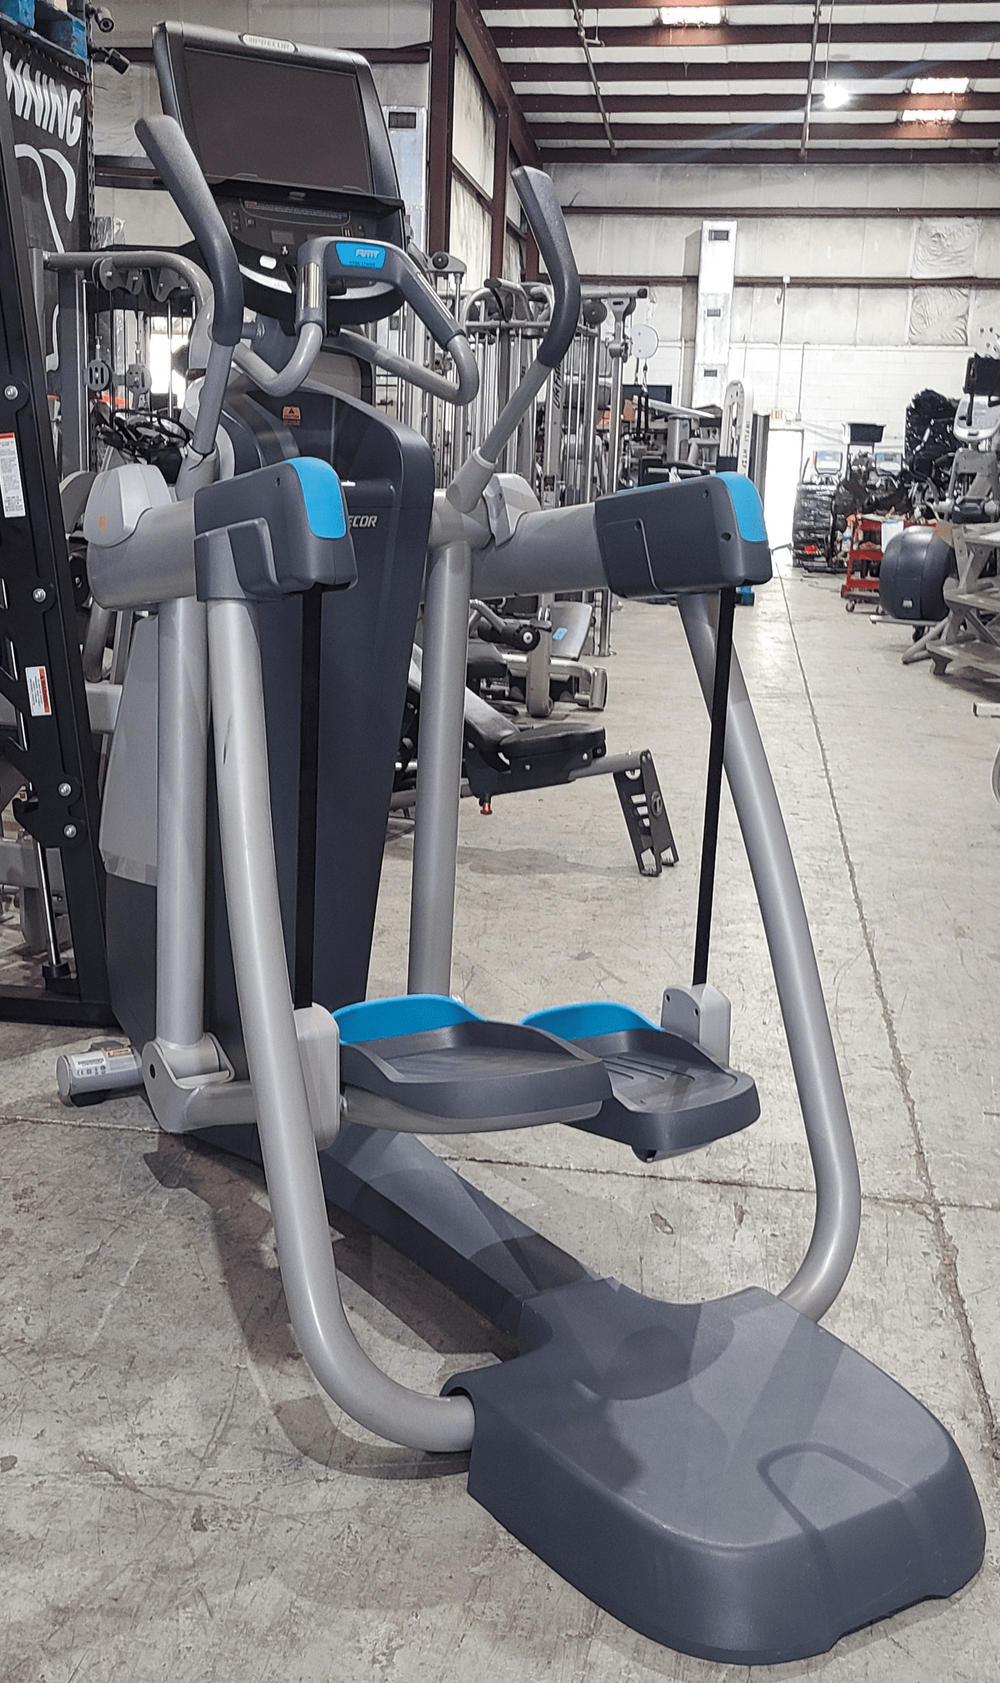 Precor AMT 885 Open Stride W/ p82 Console - Refurbished - Buy & Sell Fitness